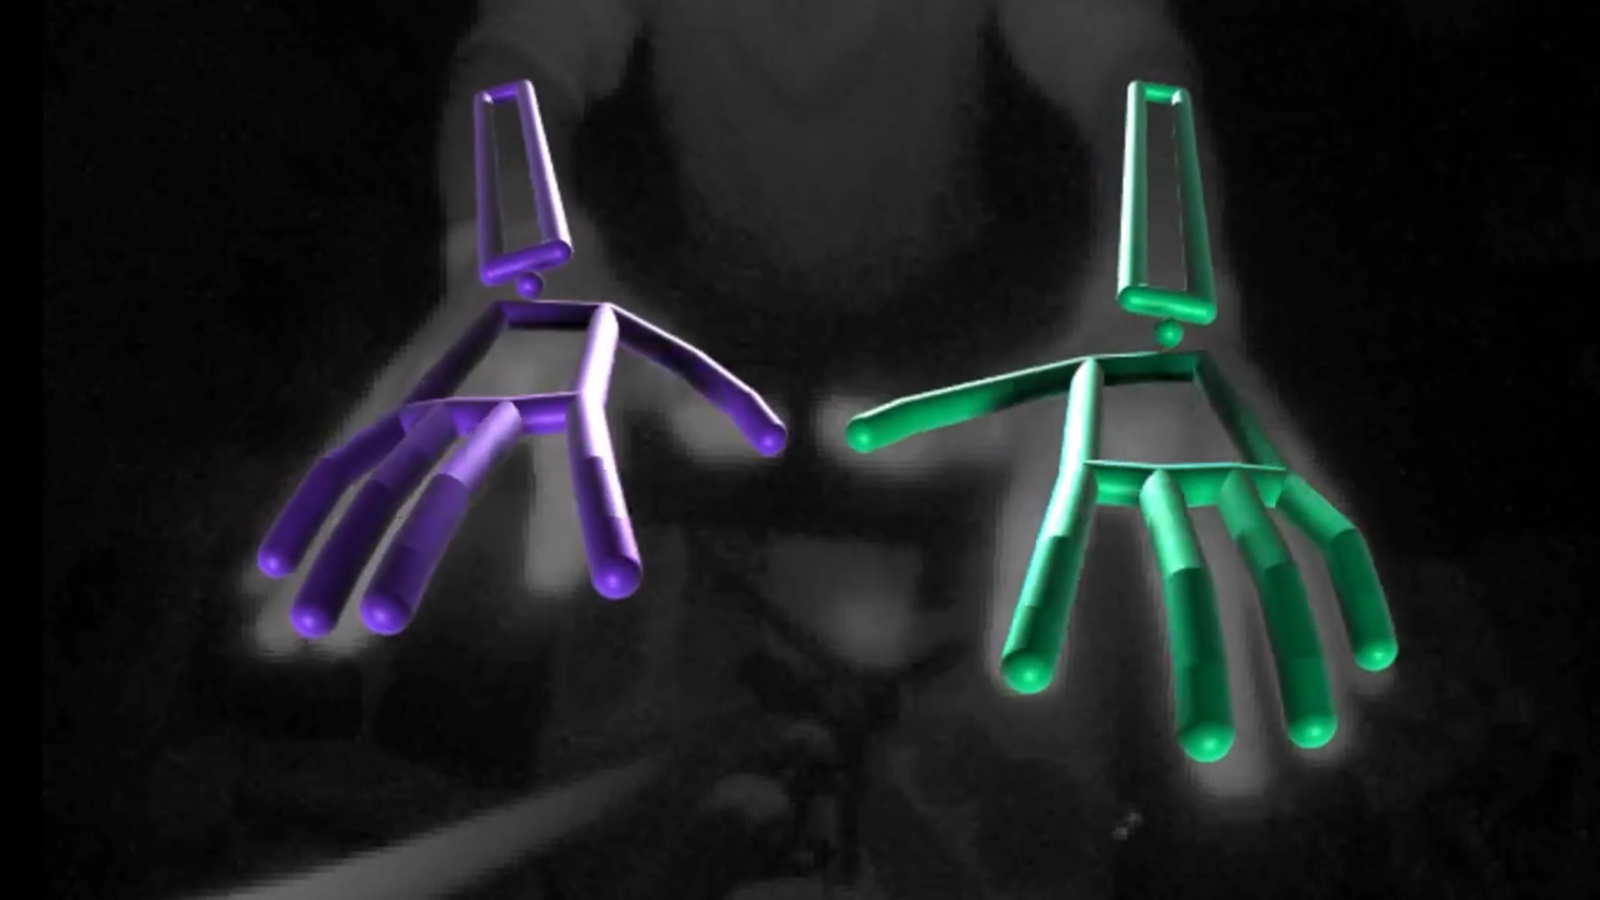 Ultraleap Hand Tracking Camera image of hands